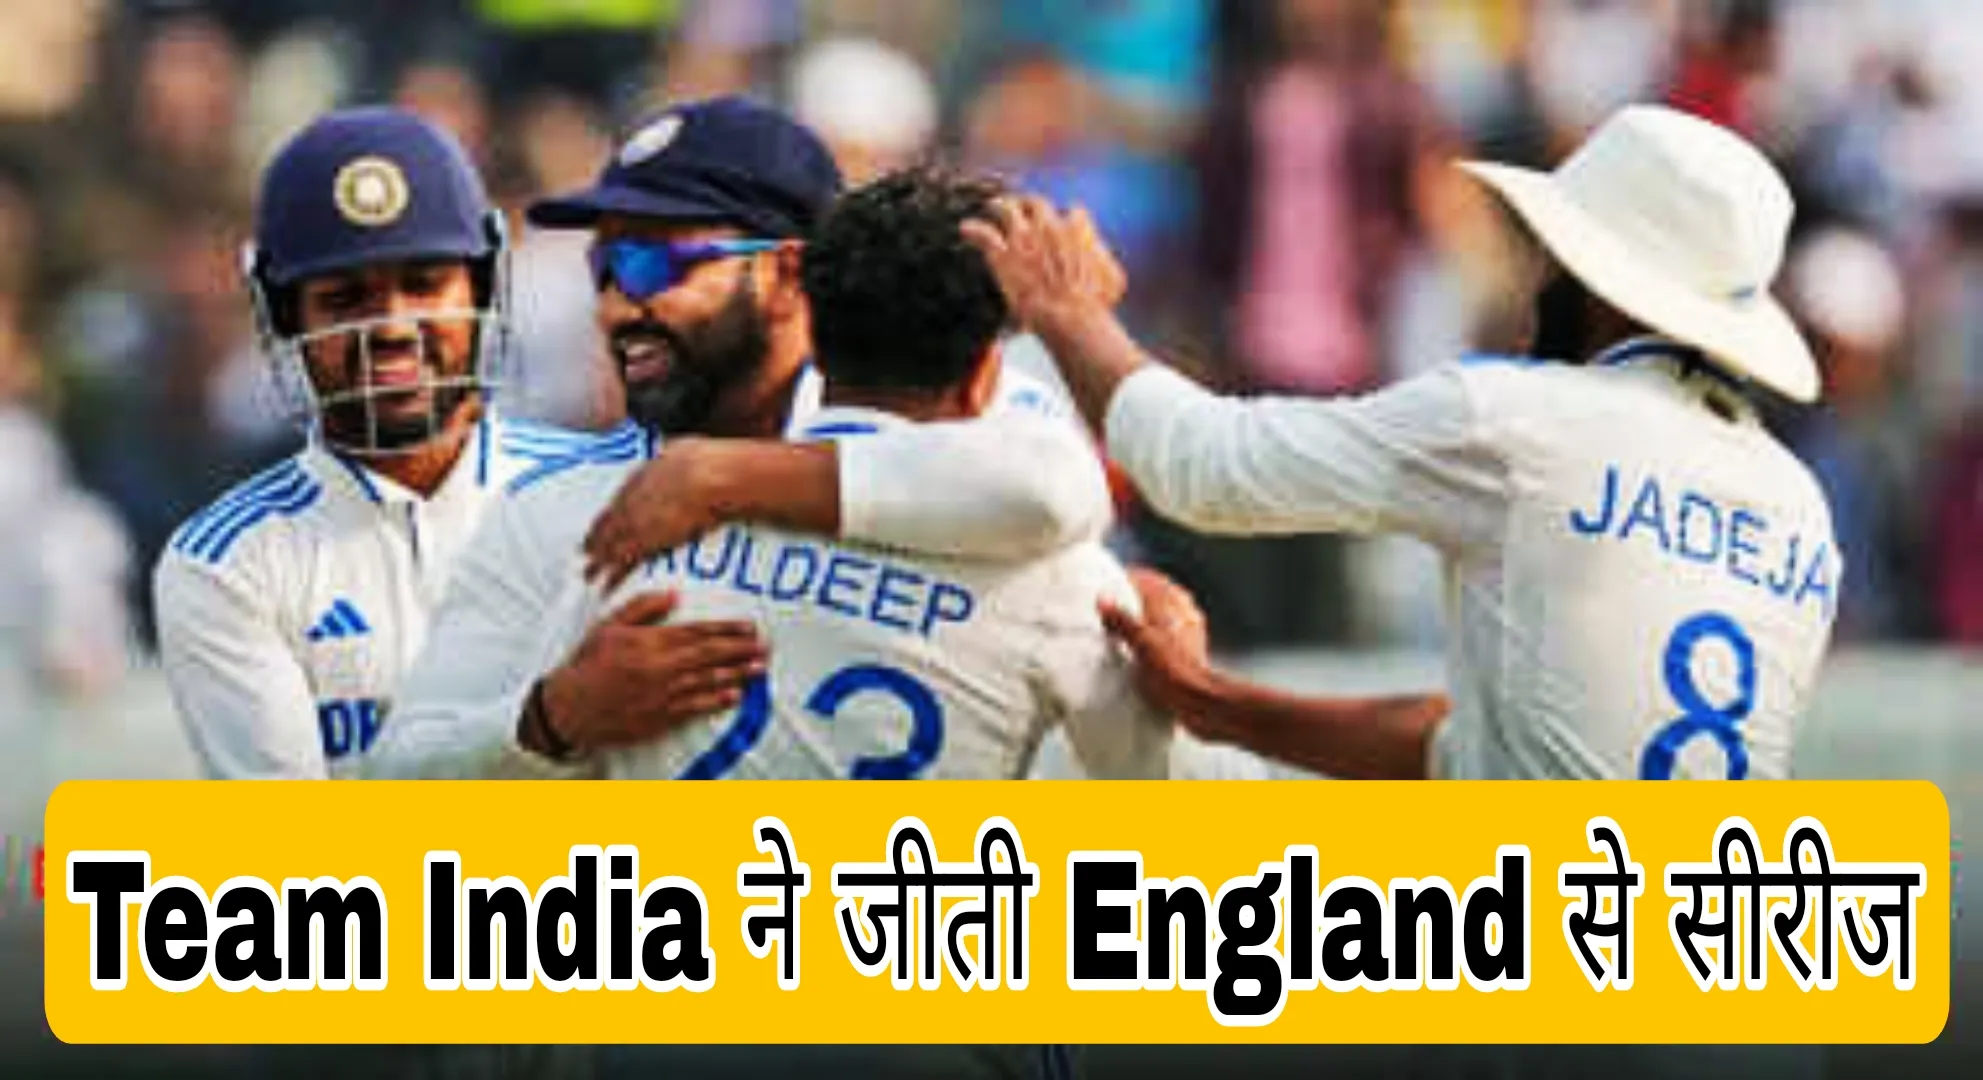 Team India Won The Series From England